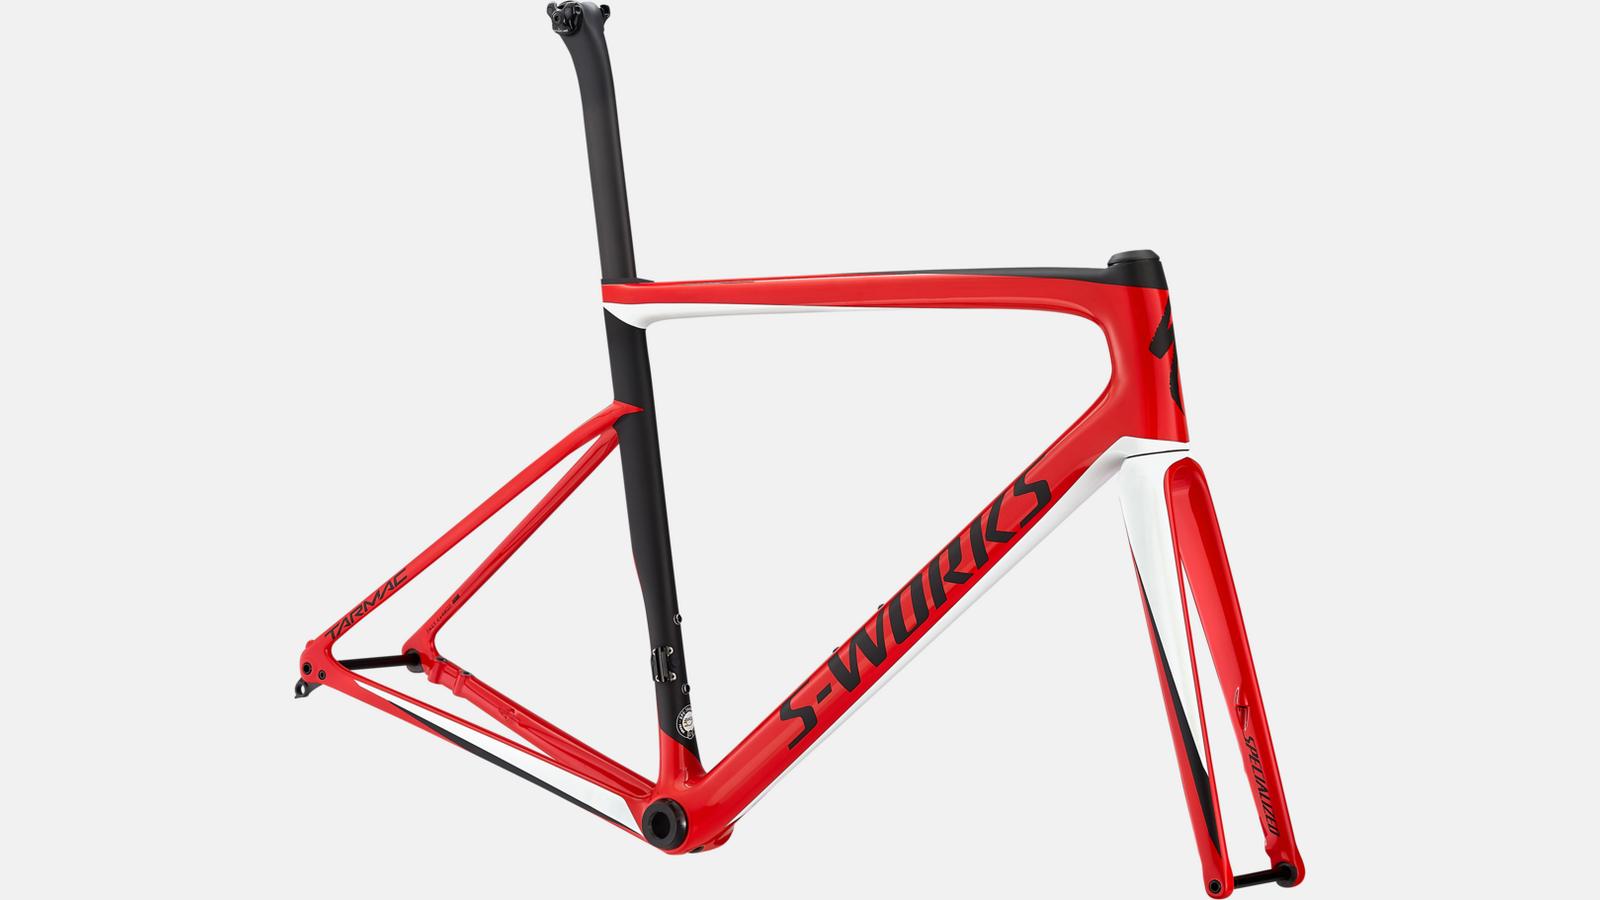 Paint for 2019 Specialized S-Works Tarmac SL6 Disc Frameset - Gloss Flo Red